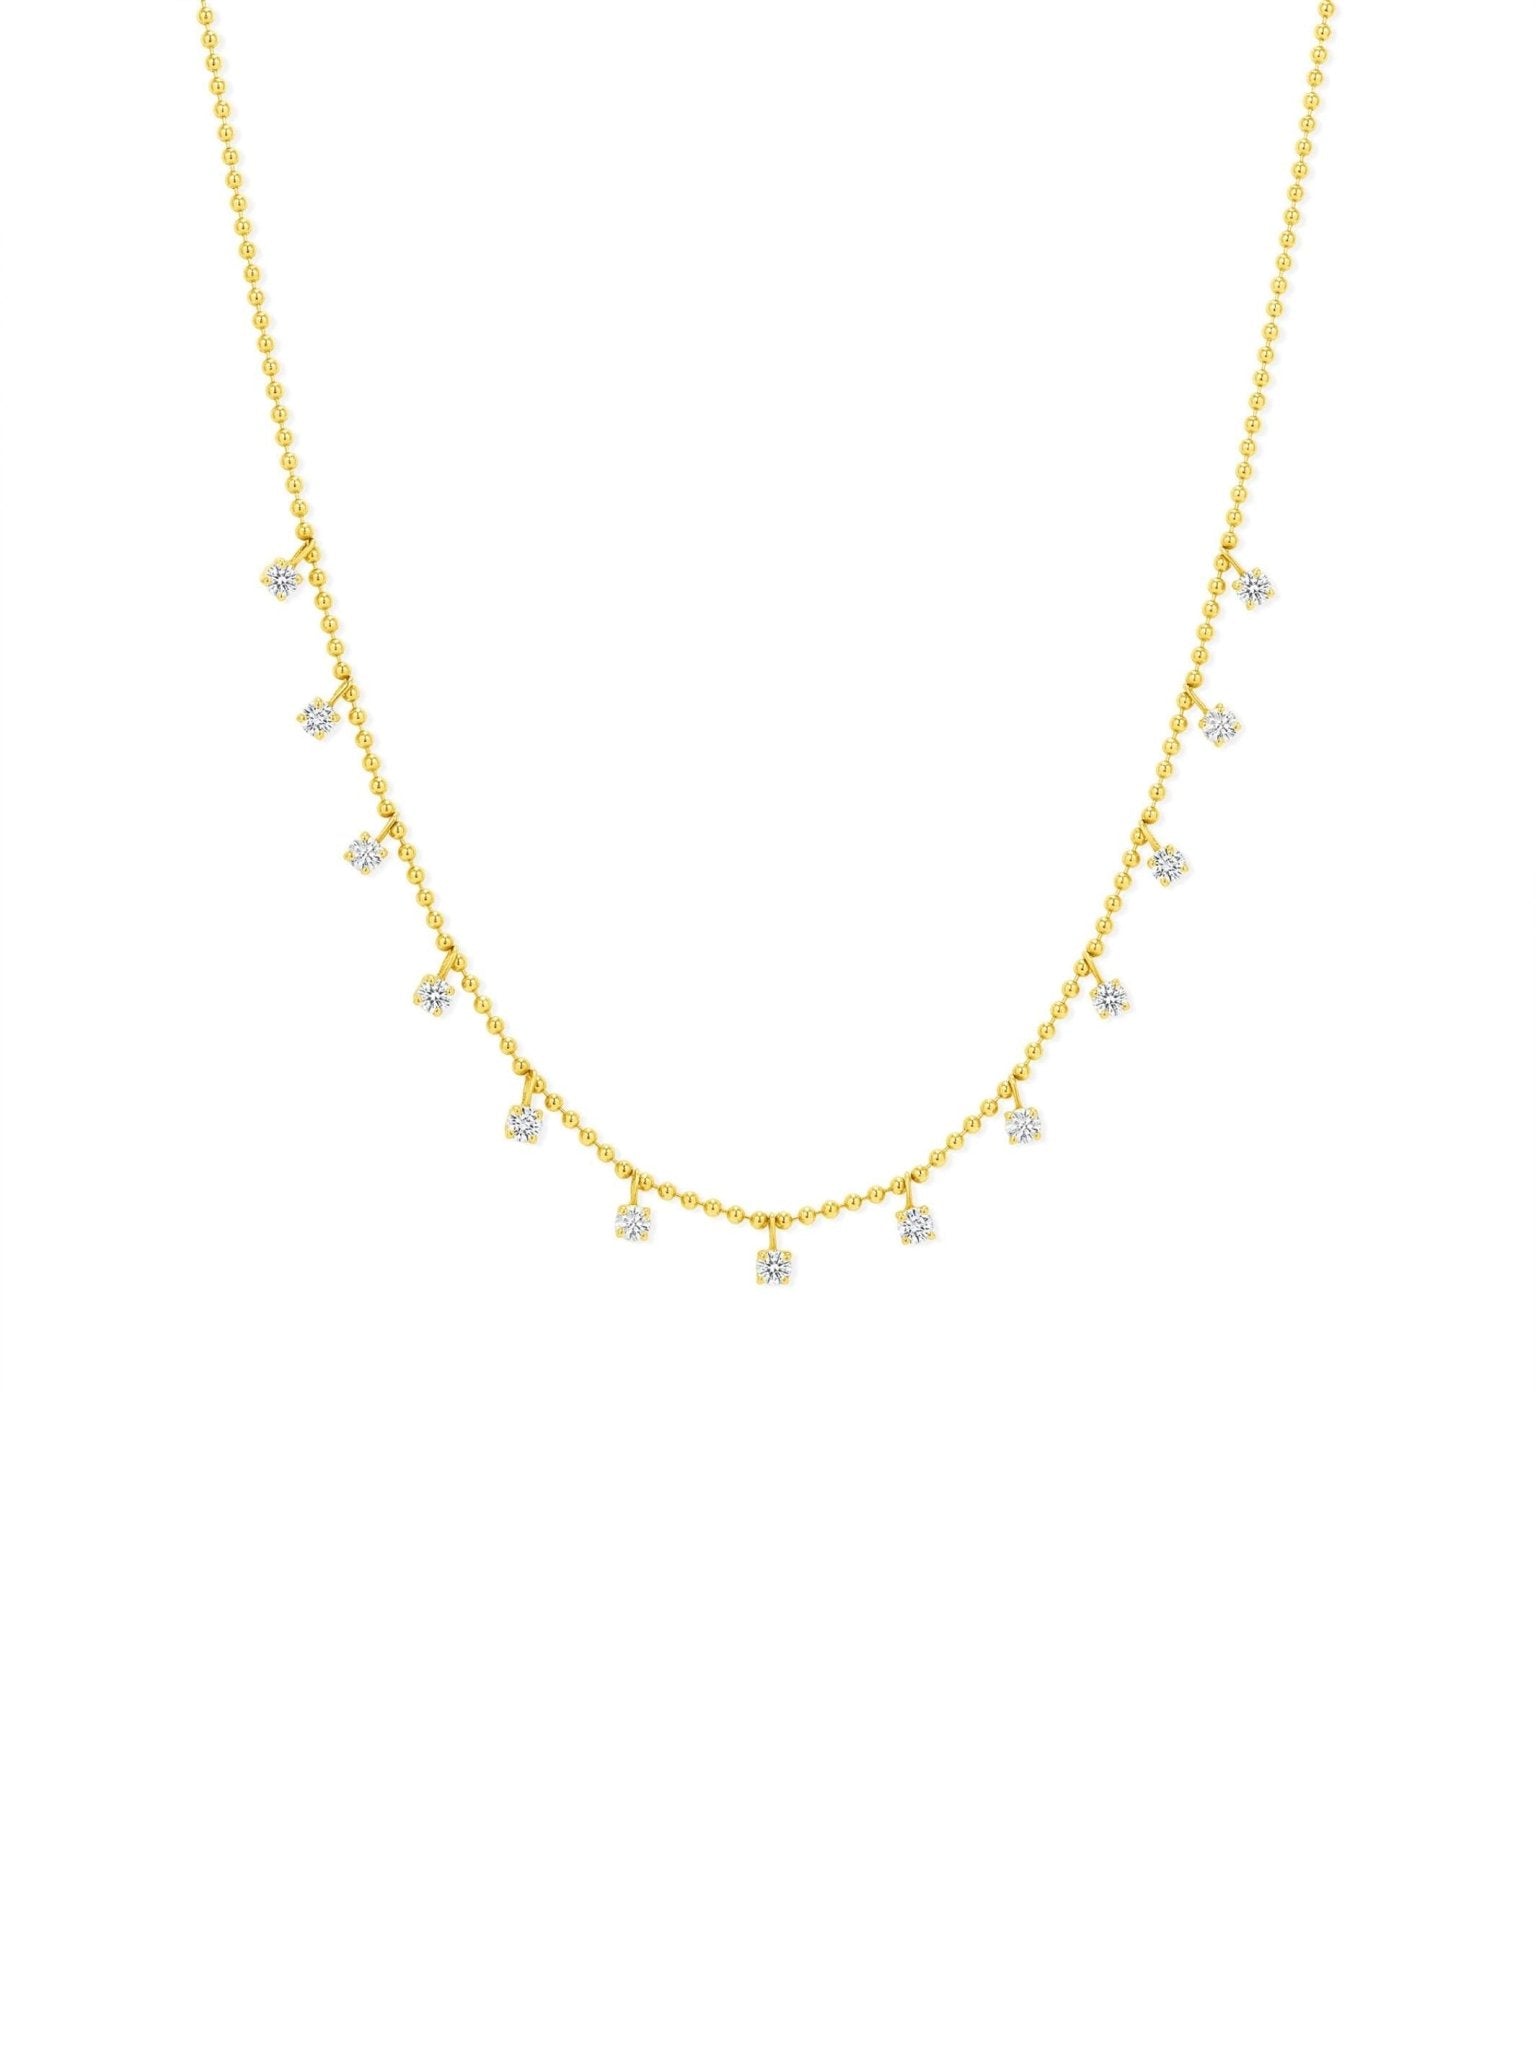 Solid White Gold Floating Diamond Necklace | Lily & Roo | Wolf & Badger